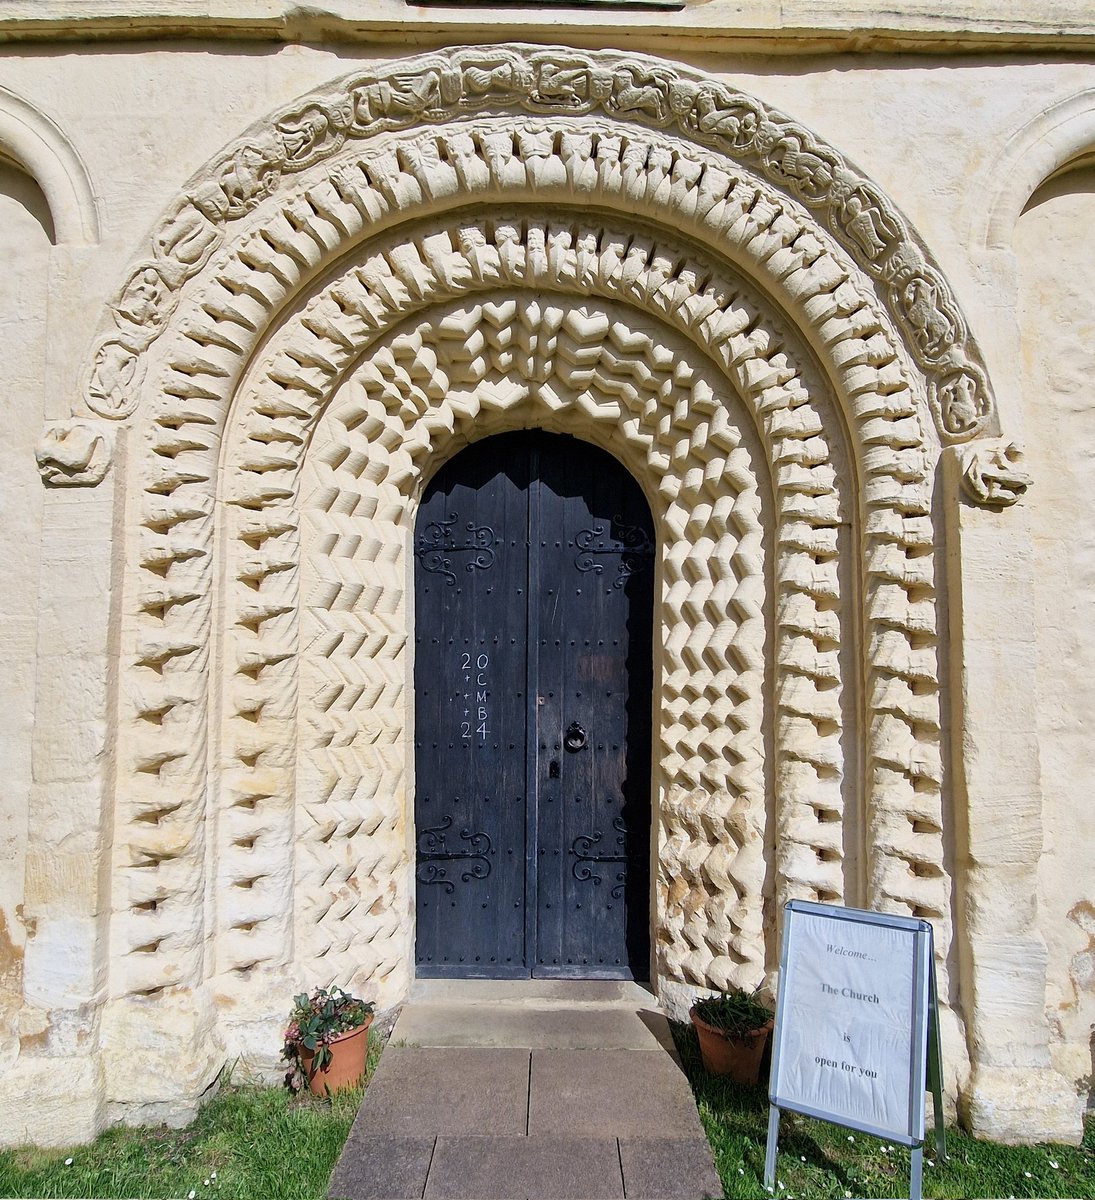 One of the *top* #AdoorableThursday doors of all time - Iffley. I've known #Oxford since I was 21 - why has it taken 30 years to get here? Beakheads! Zig-zag! #Zodiac signs! Evangelists! I mean, look at it!